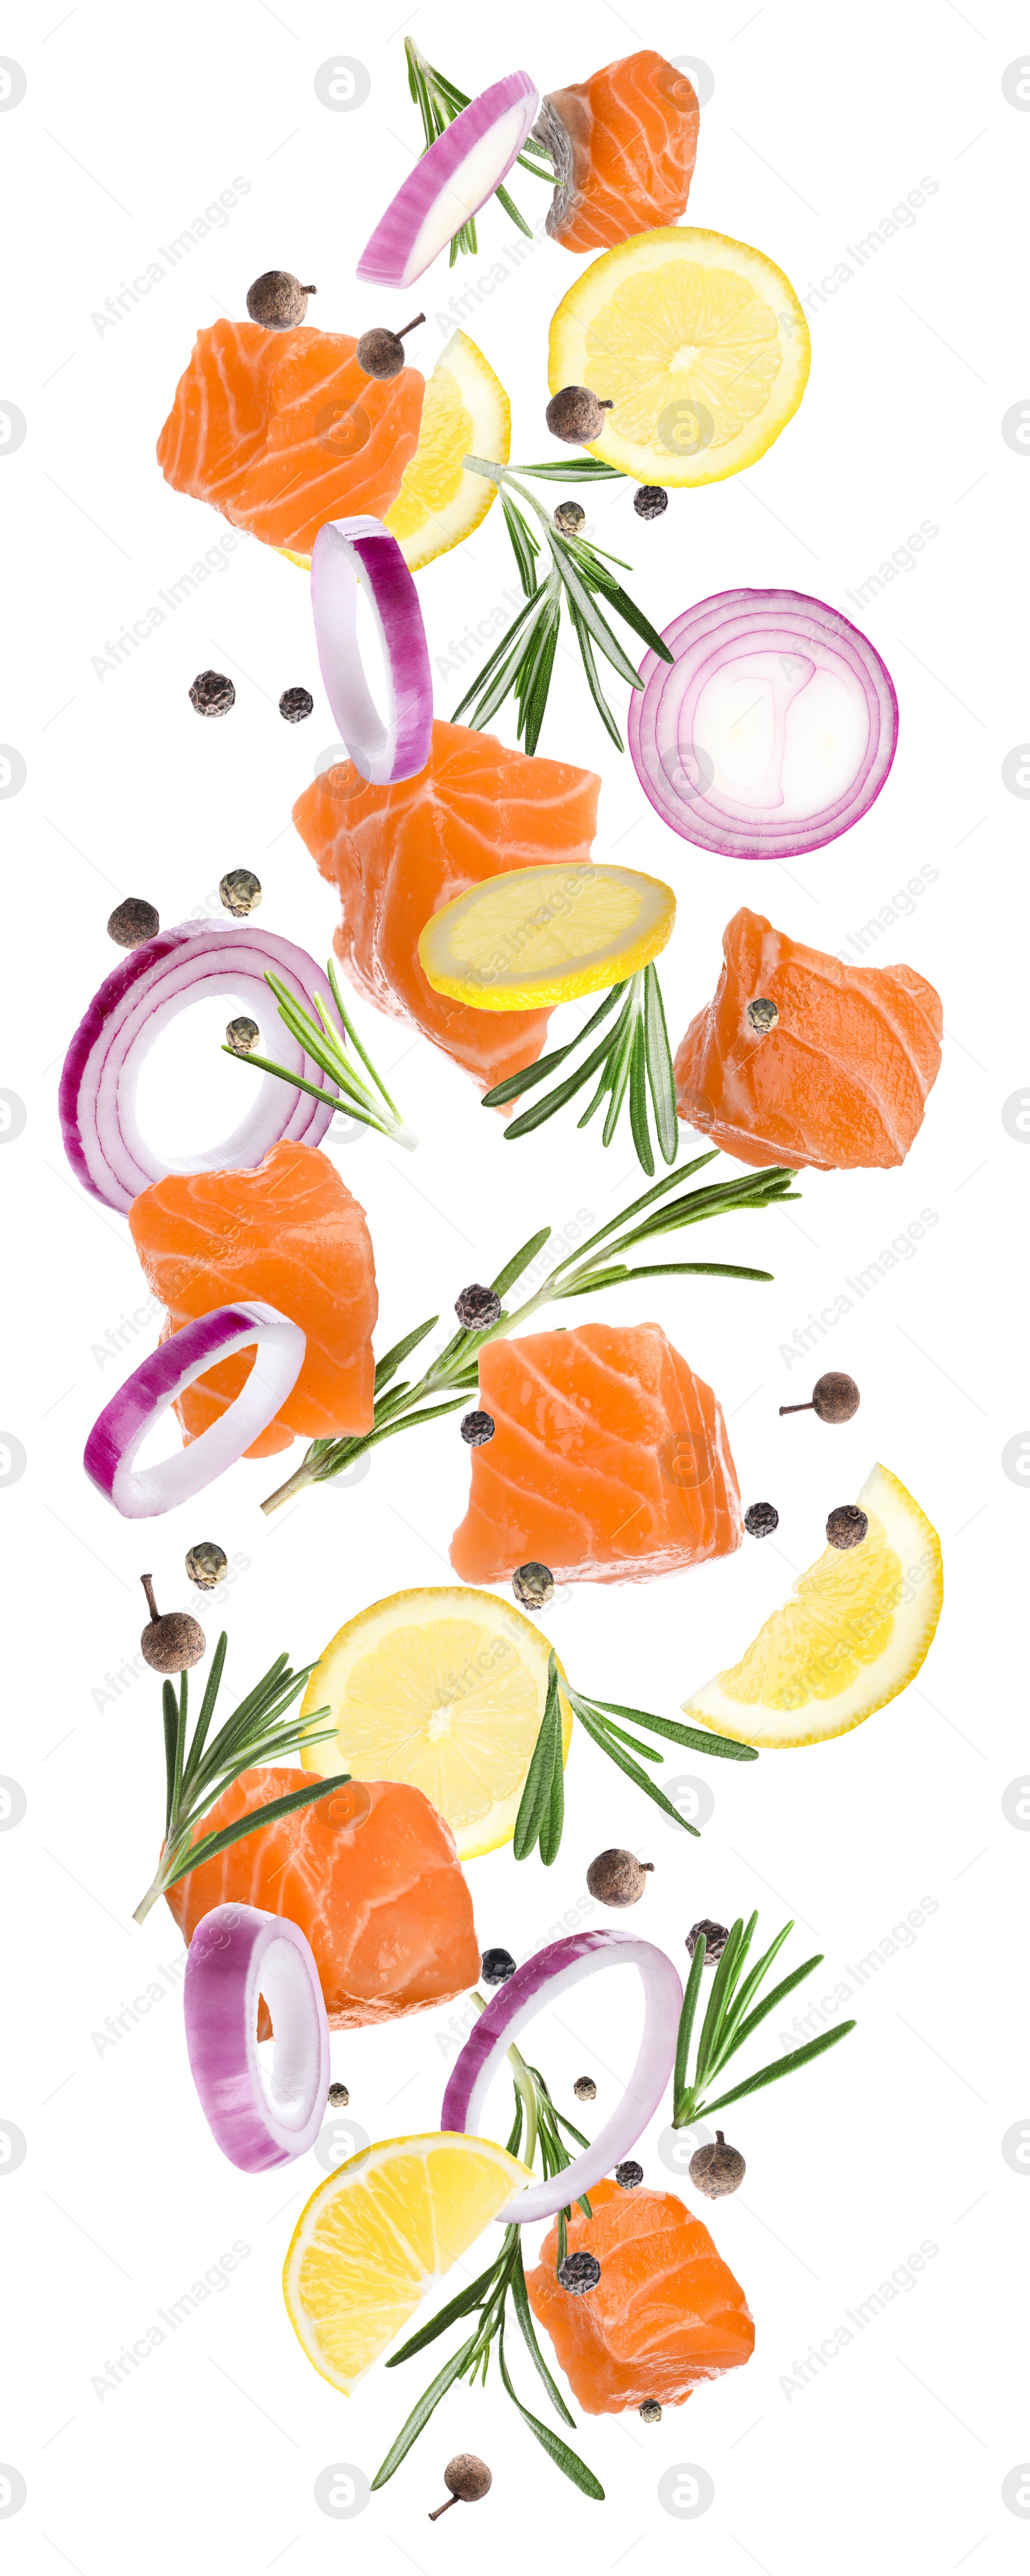 Image of Pieces of delicious fresh raw salmon and different spices on white background. Vertical banner design 